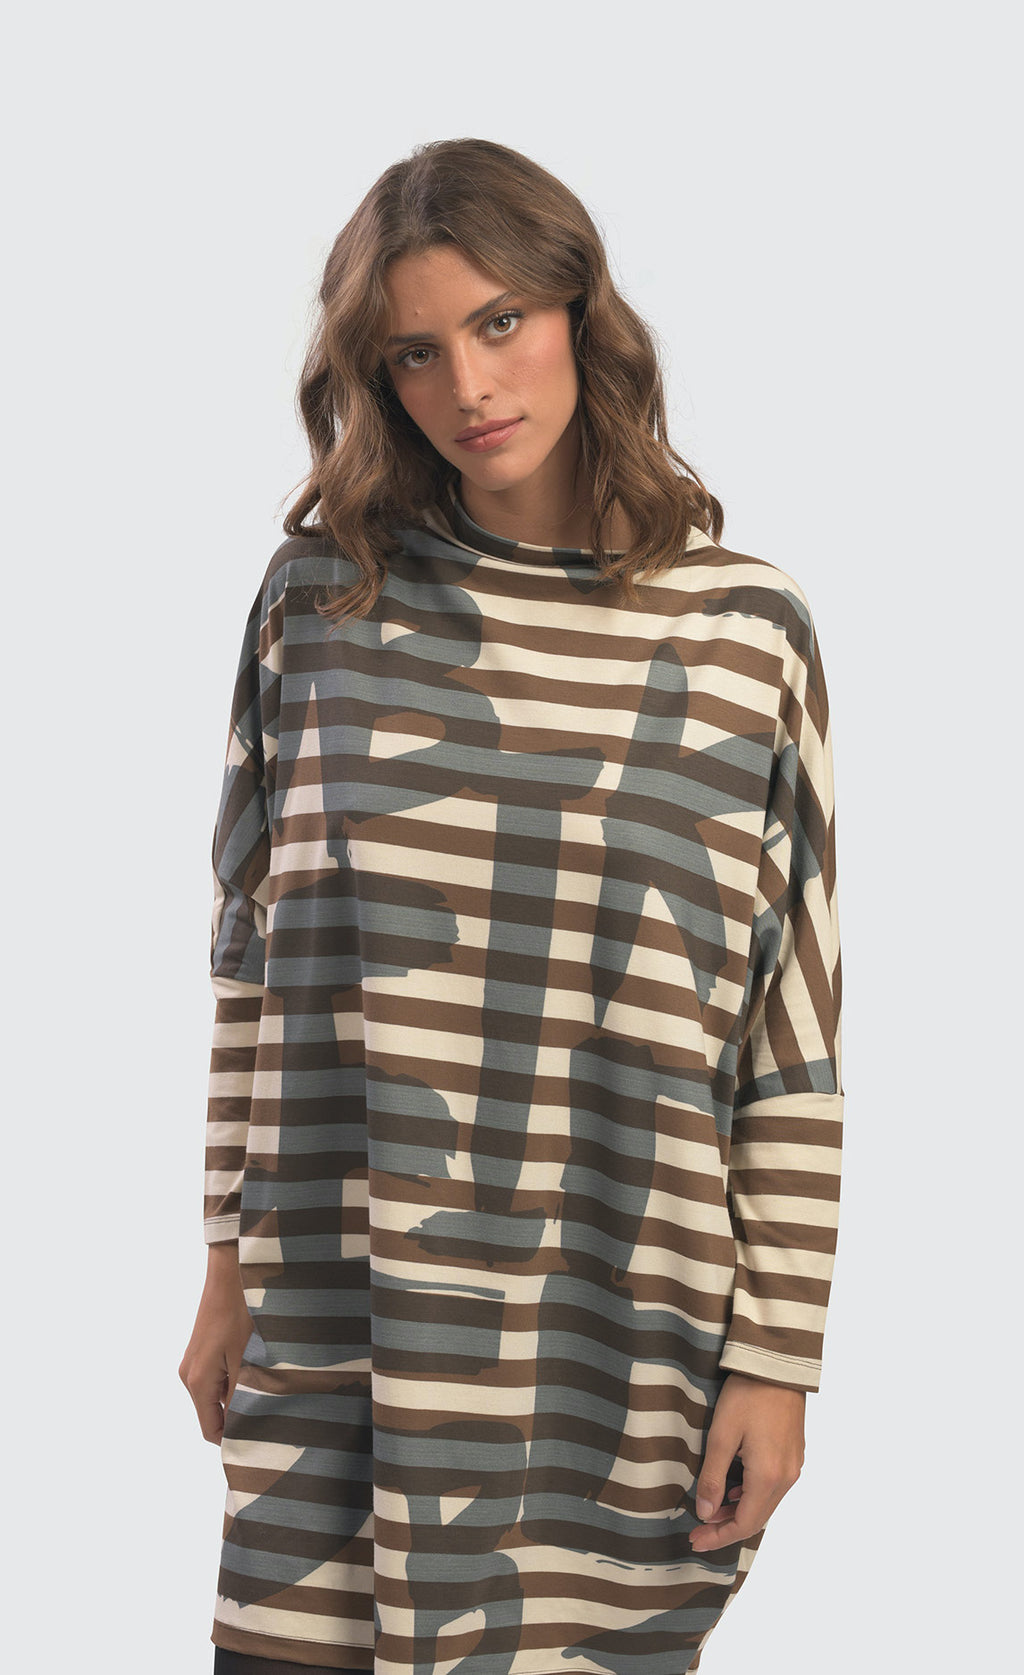 Front top half view of a woman wearing the Alembika Urban Clustur Cocoon Dress. This dress is cream and brown striped with a gray graffiti print all over it. The dress has a cocoon shape that tapers in at the knees. It has drop shoulder, long dolman sleeves and a mock neck.